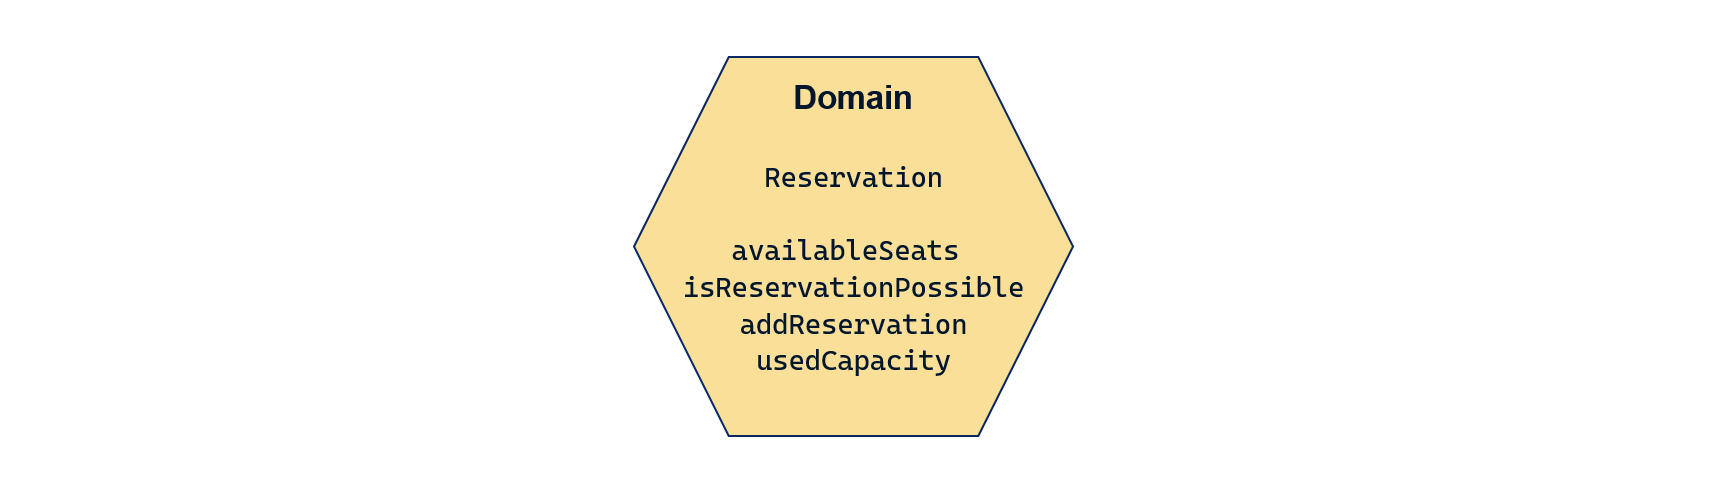 The Domain layer